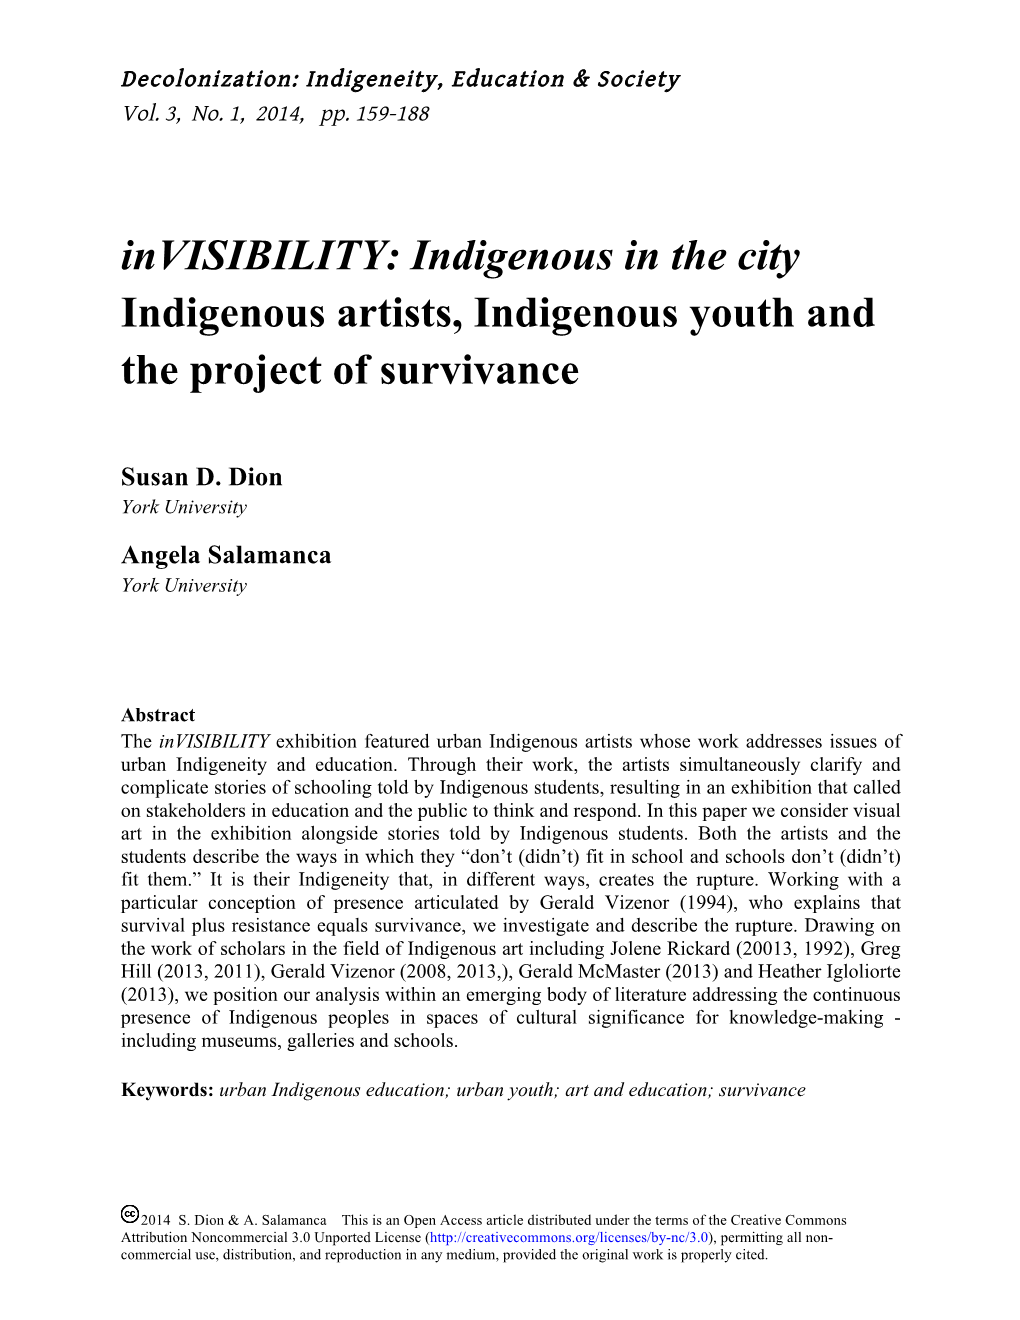 Invisibility: Indigenous in the City Indigenous Artists, Indigenous Youth and the Project of Survivance